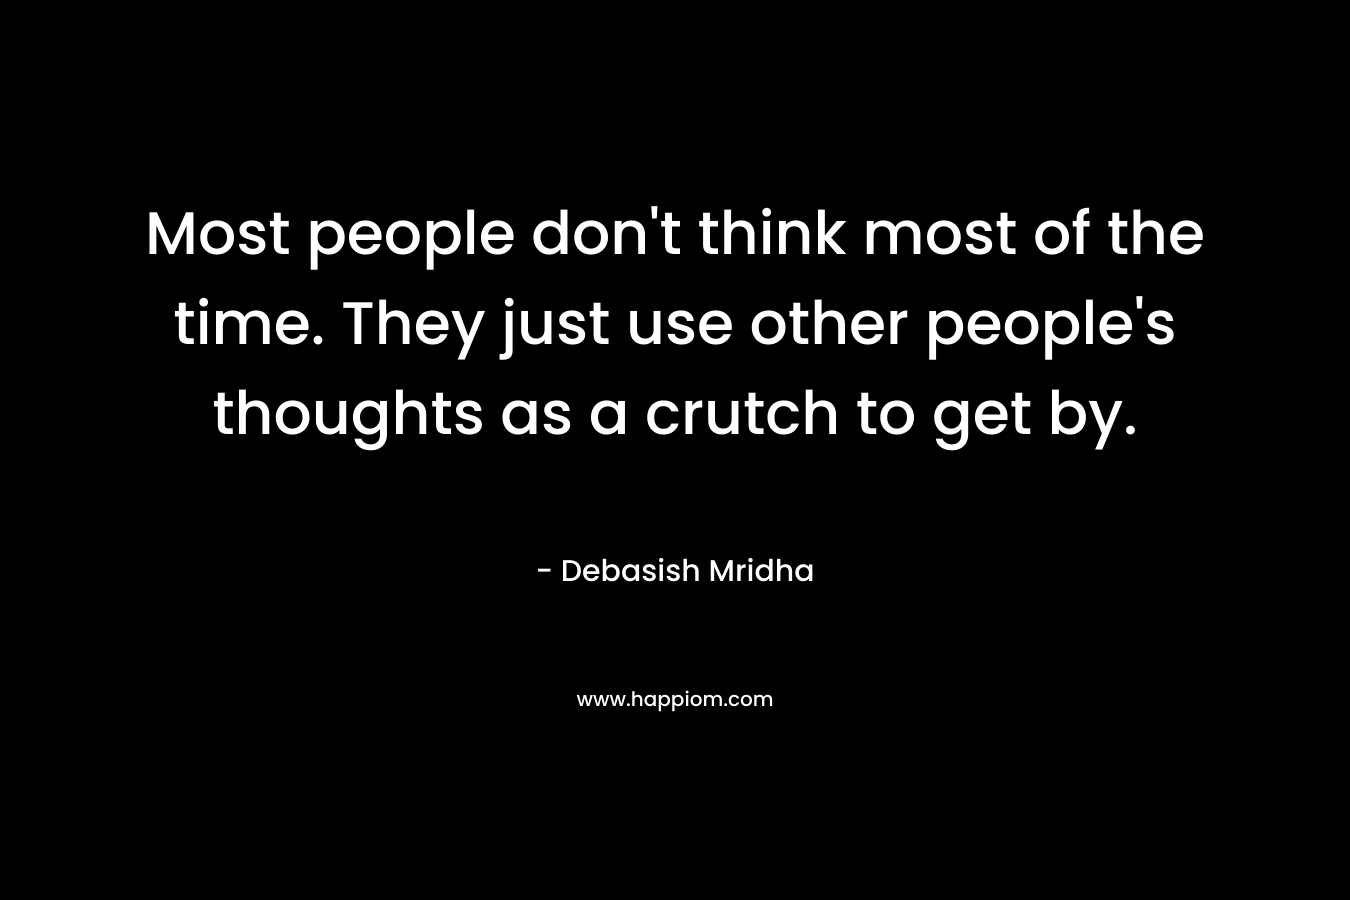 Most people don't think most of the time. They just use other people's thoughts as a crutch to get by.